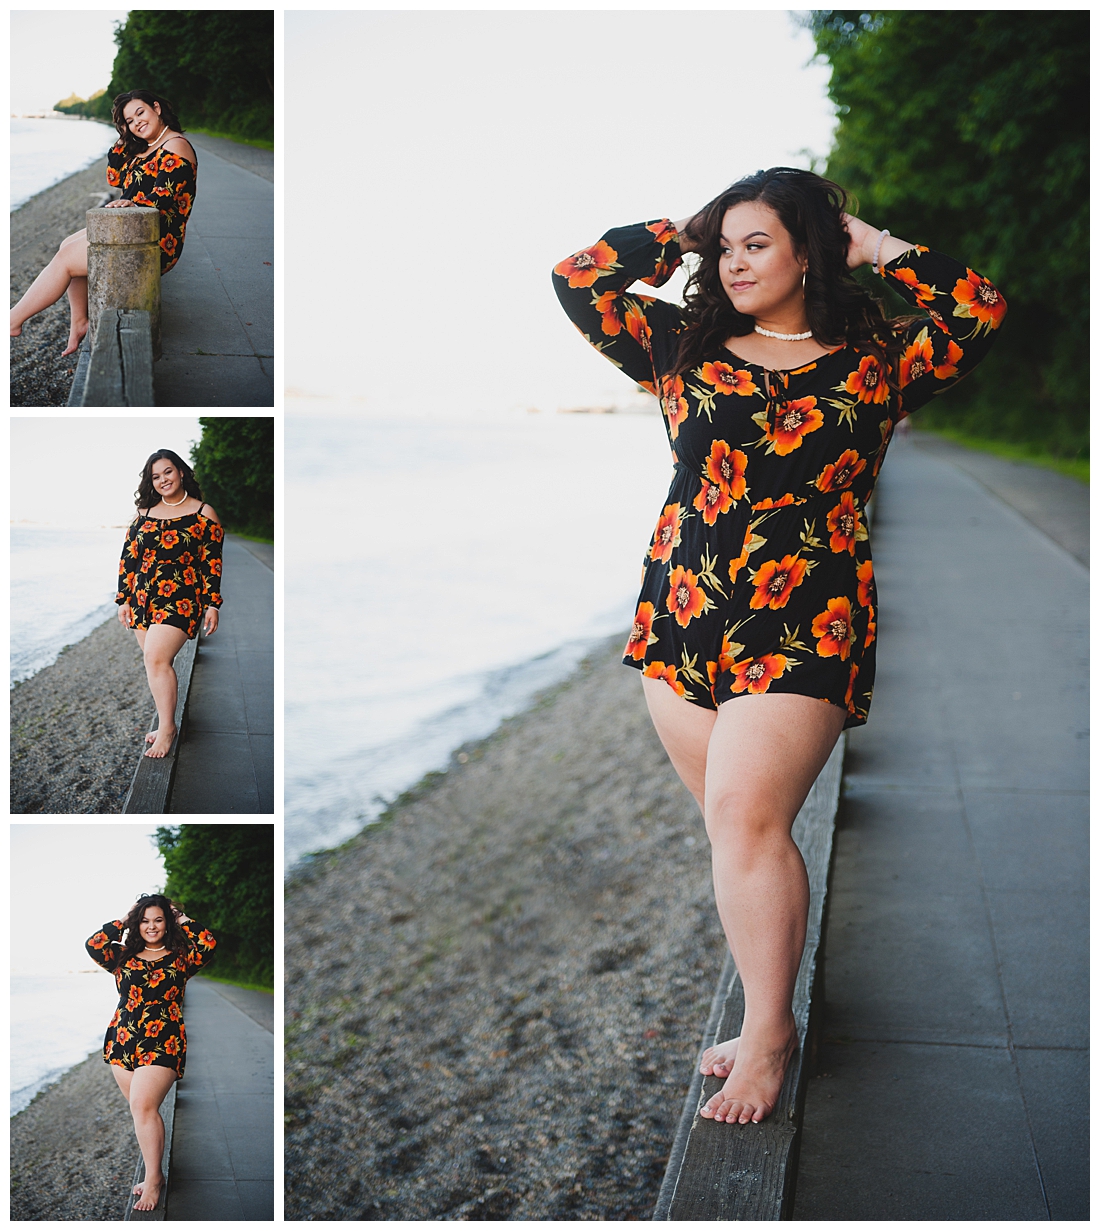 Beachy Summer Portraits with Floral Romper and Cute Poses Photographed by Tacoma Senior Photographer Amanda Howse